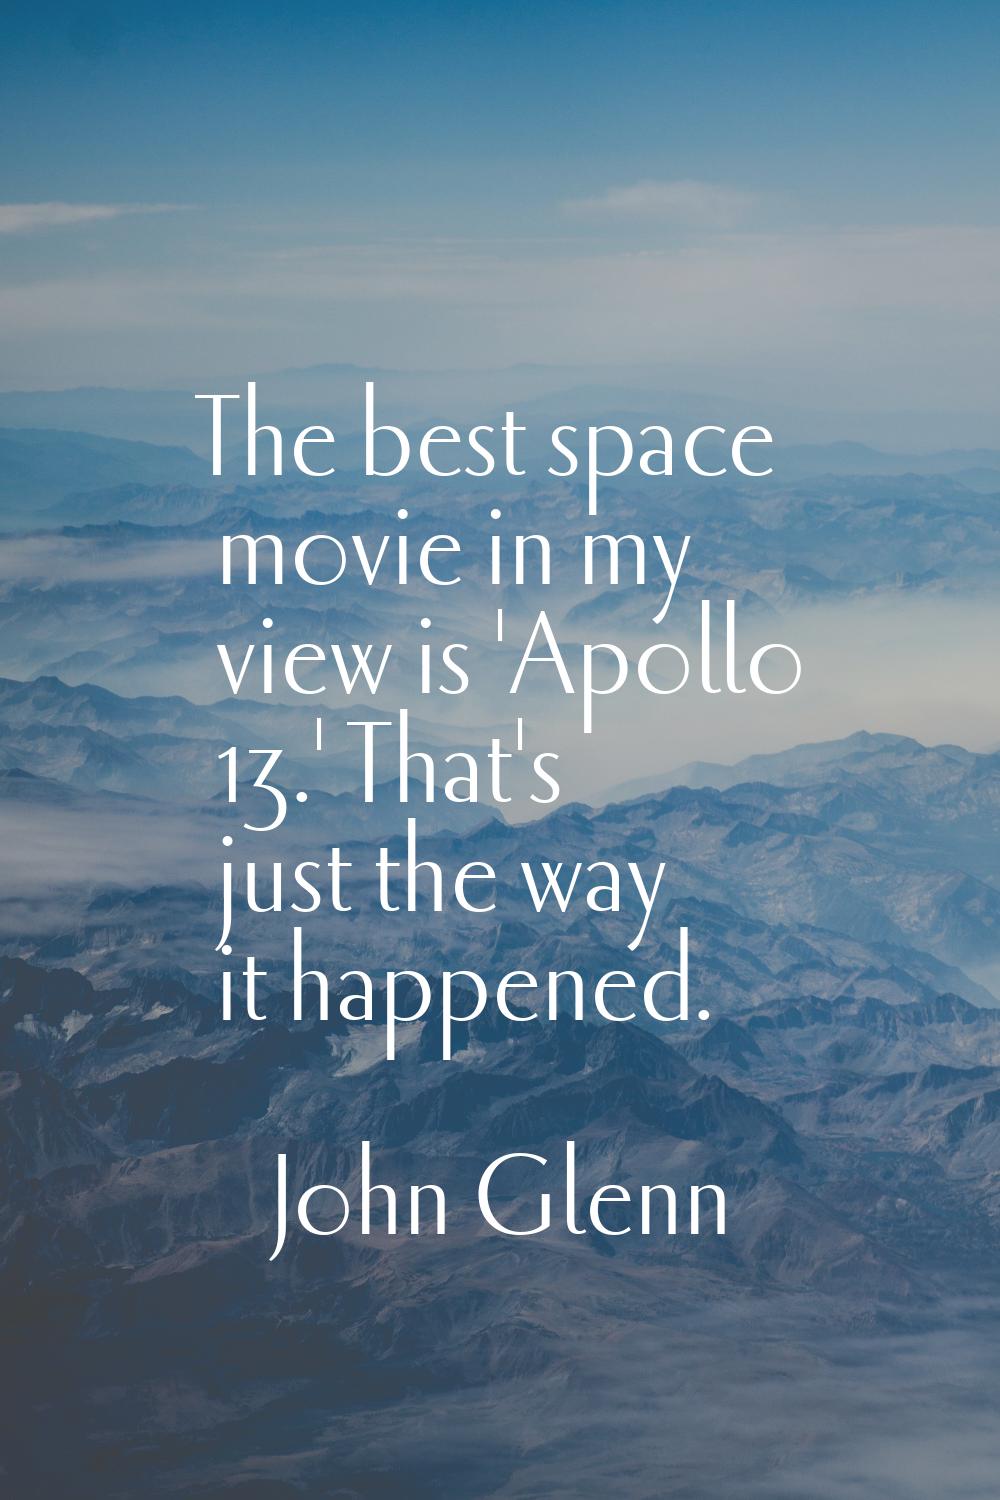 The best space movie in my view is 'Apollo 13.' That's just the way it happened.